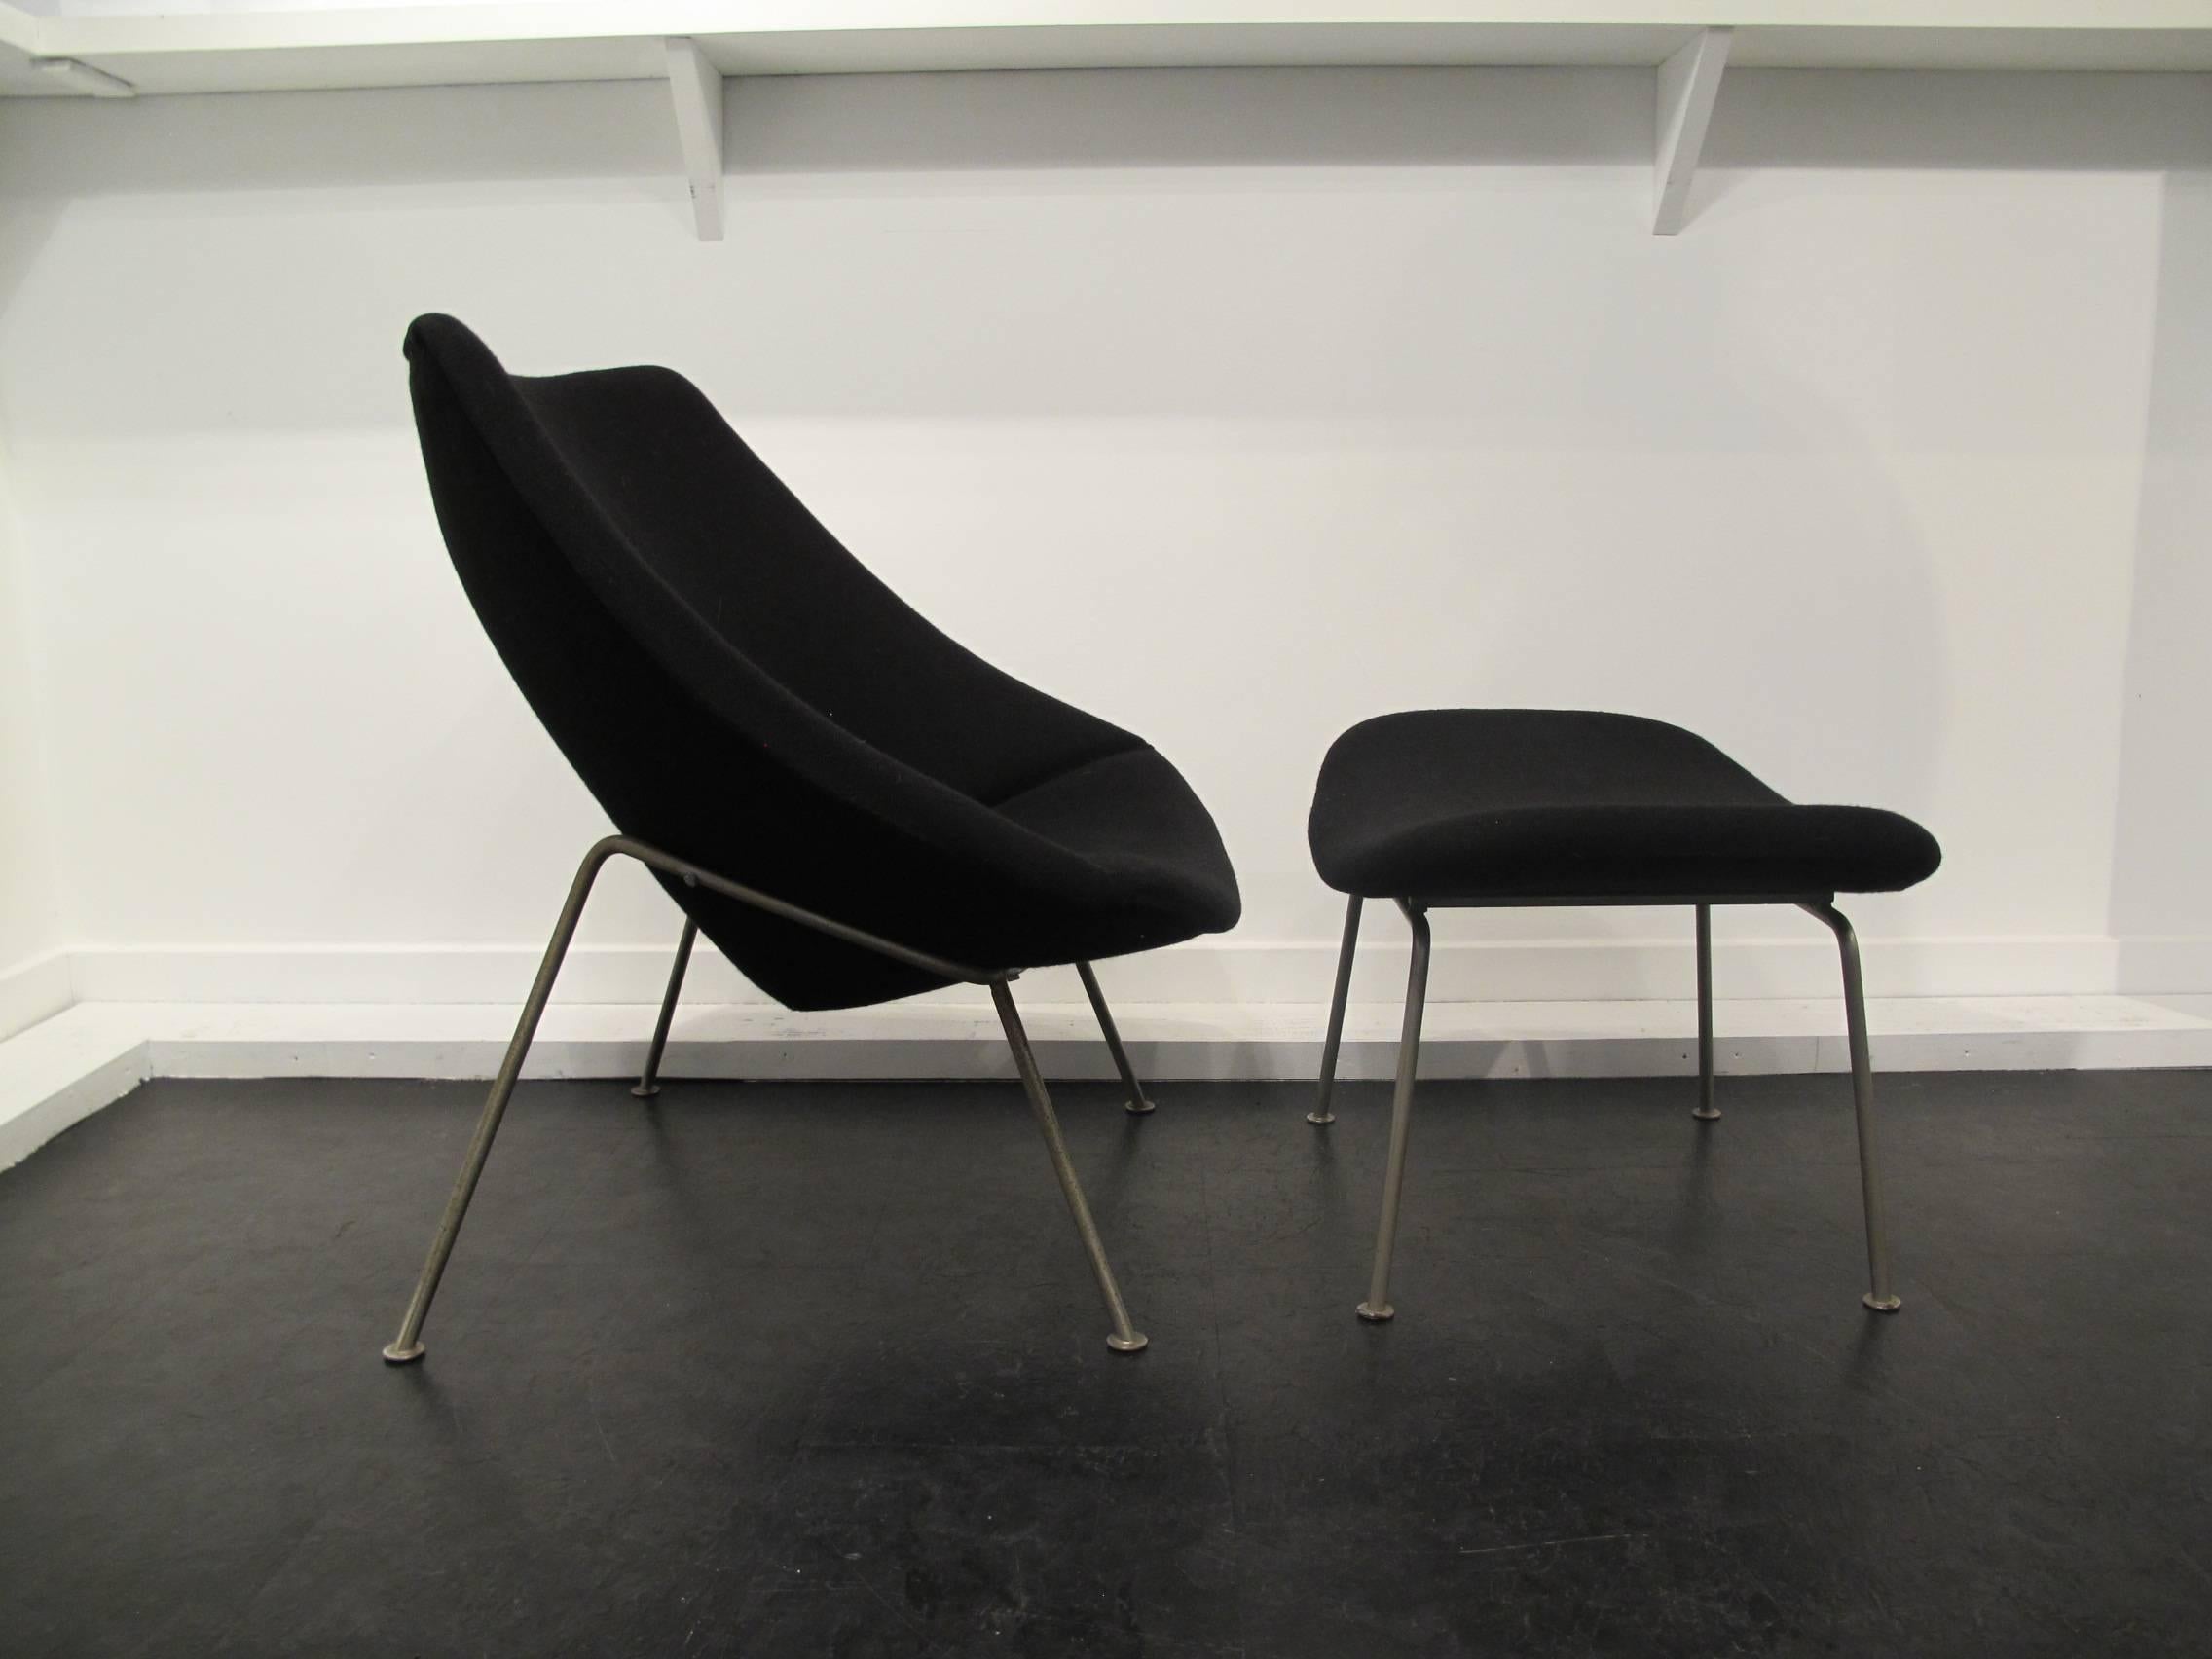 The 1960s legendary Oyster has been designed in 1954.
Very elegant and comfy